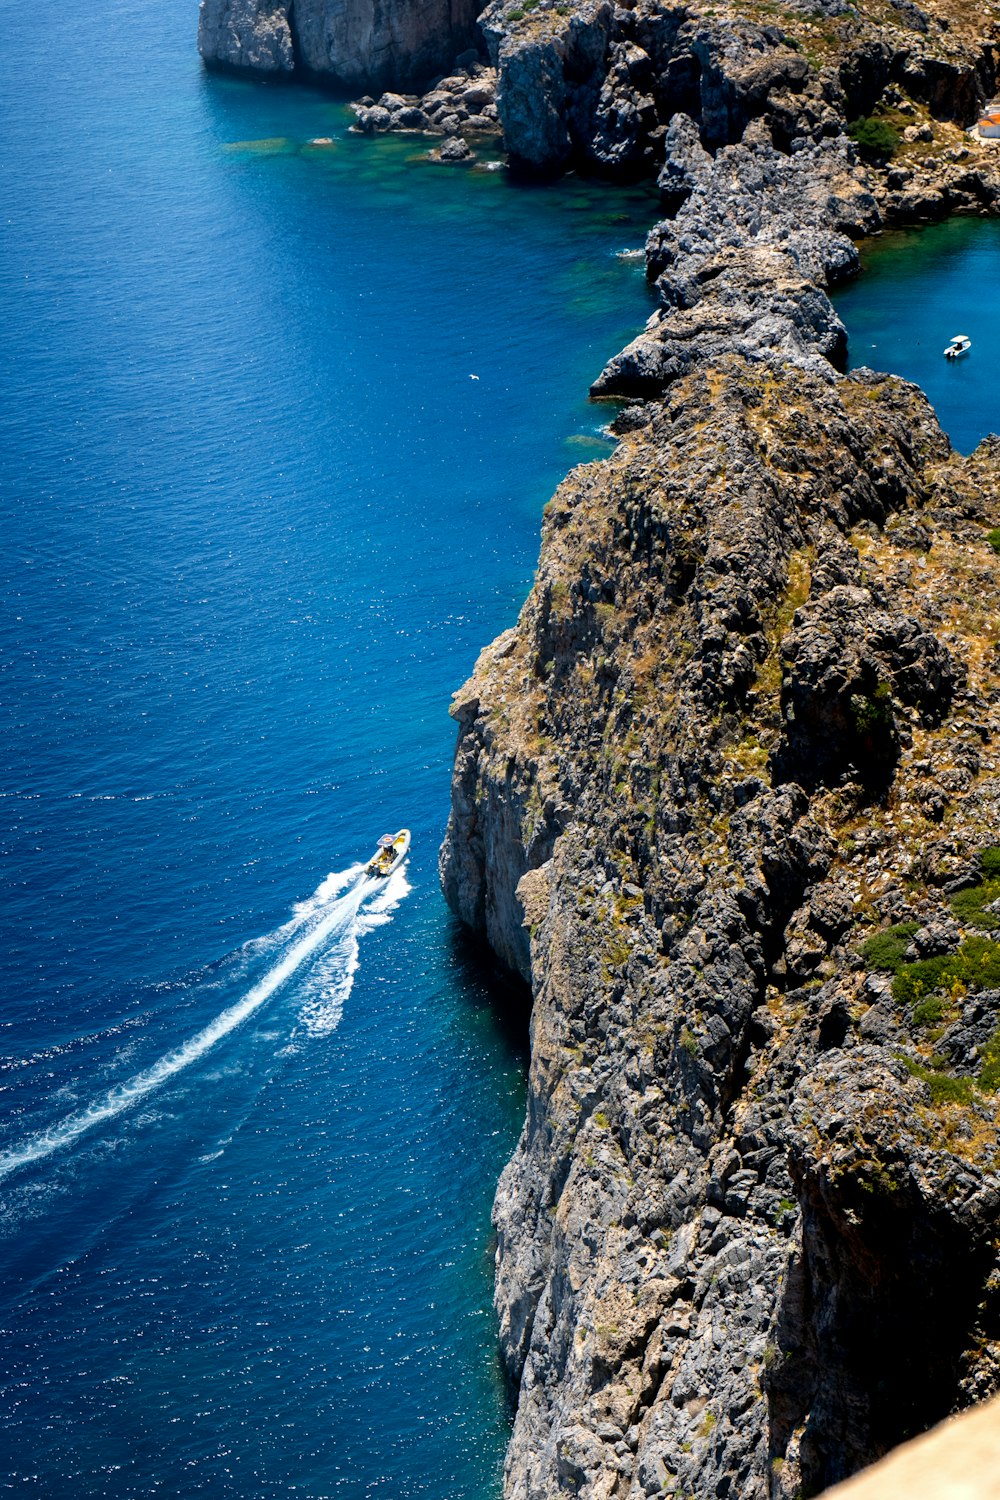 a boat traveling through a body of water next to a rocky cliff